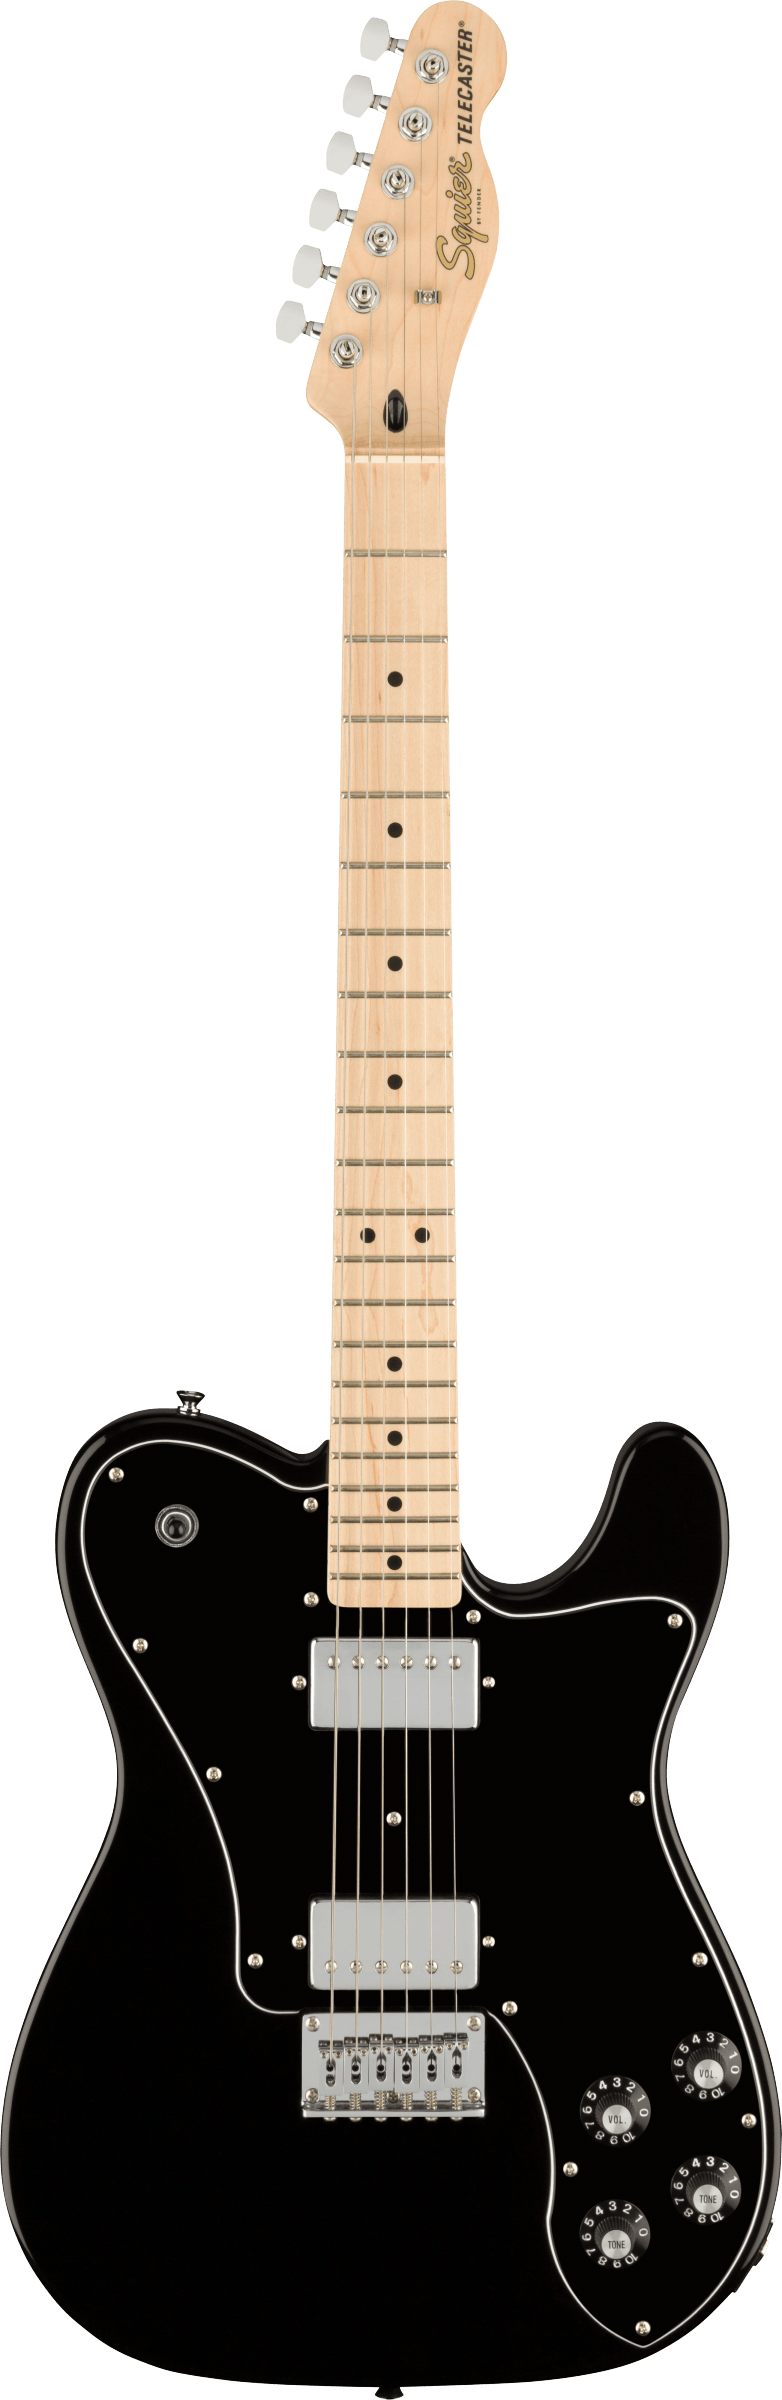 Squier Affinity Telecaster in Black - Andertons Music Co.